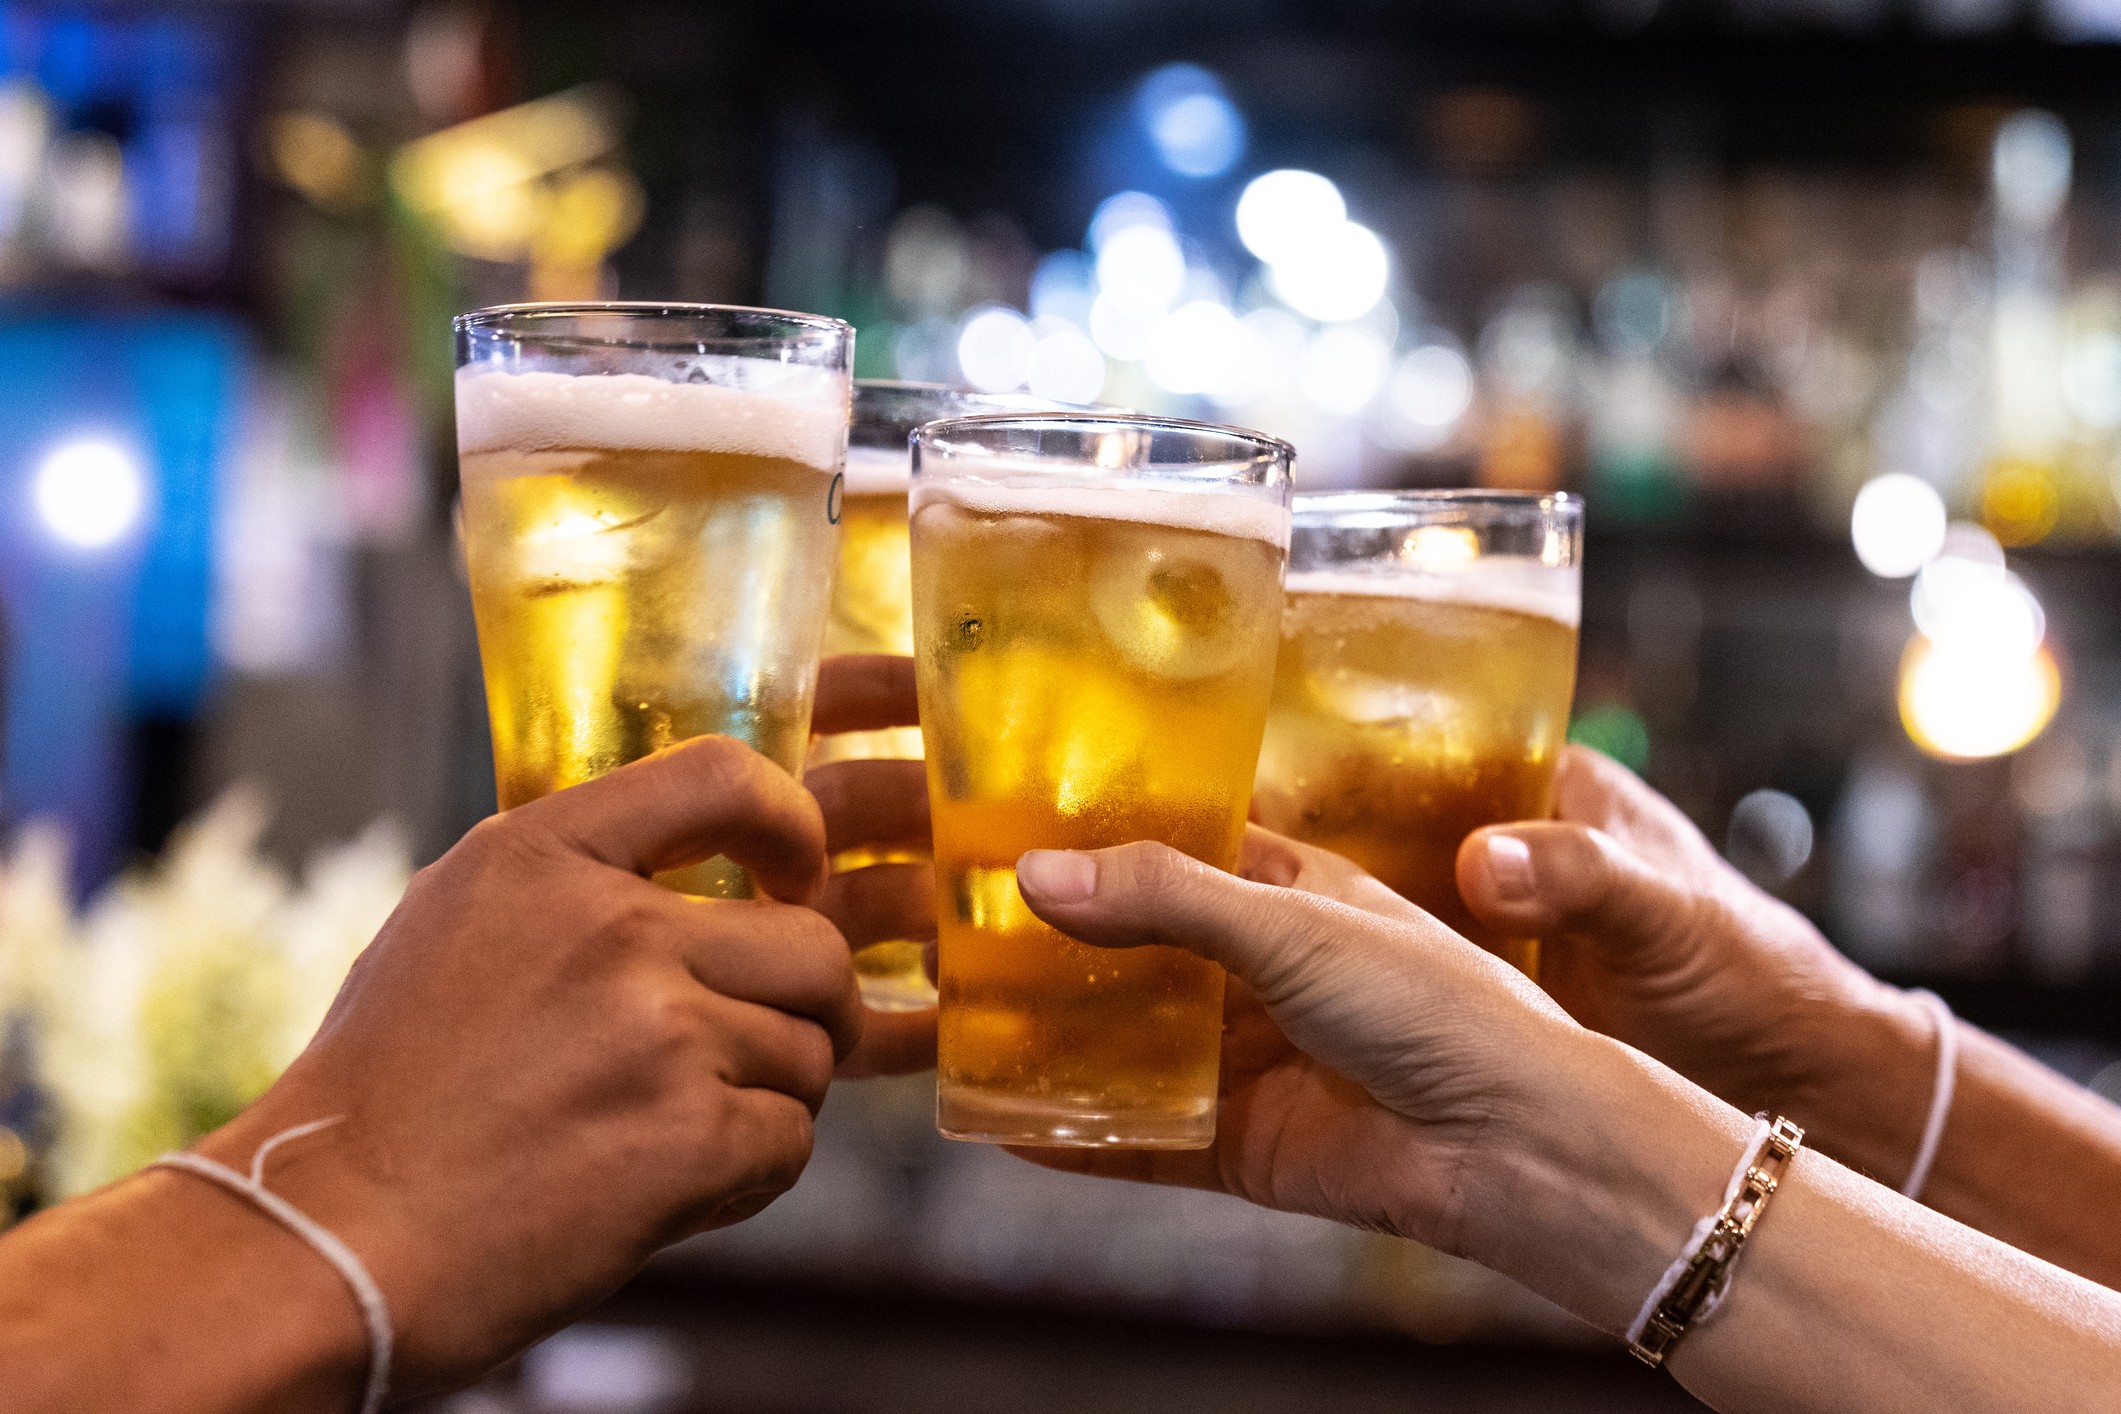 Group of happy friends drinking and toasting beer at brewery bar restaurant - Friendship concept with young people having fun together at cool vintage pub - Focus on middle pint glass - High iso image (Foto: Getty Images)